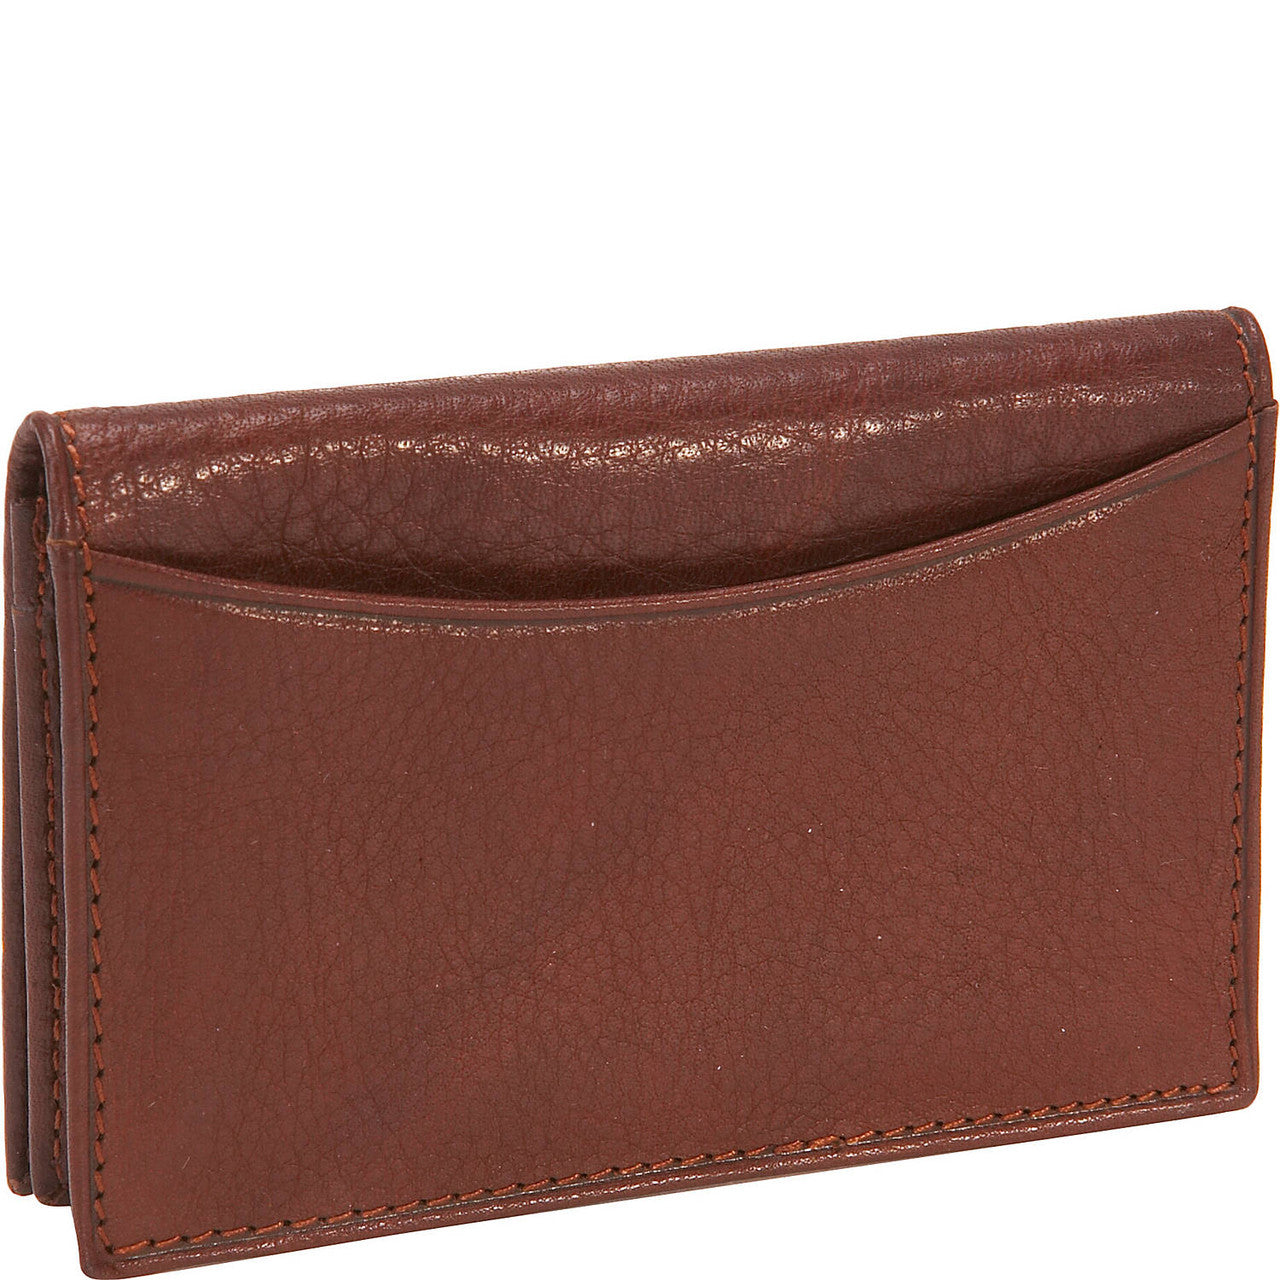 Cashmere Gusset Card Case - Leather Loom